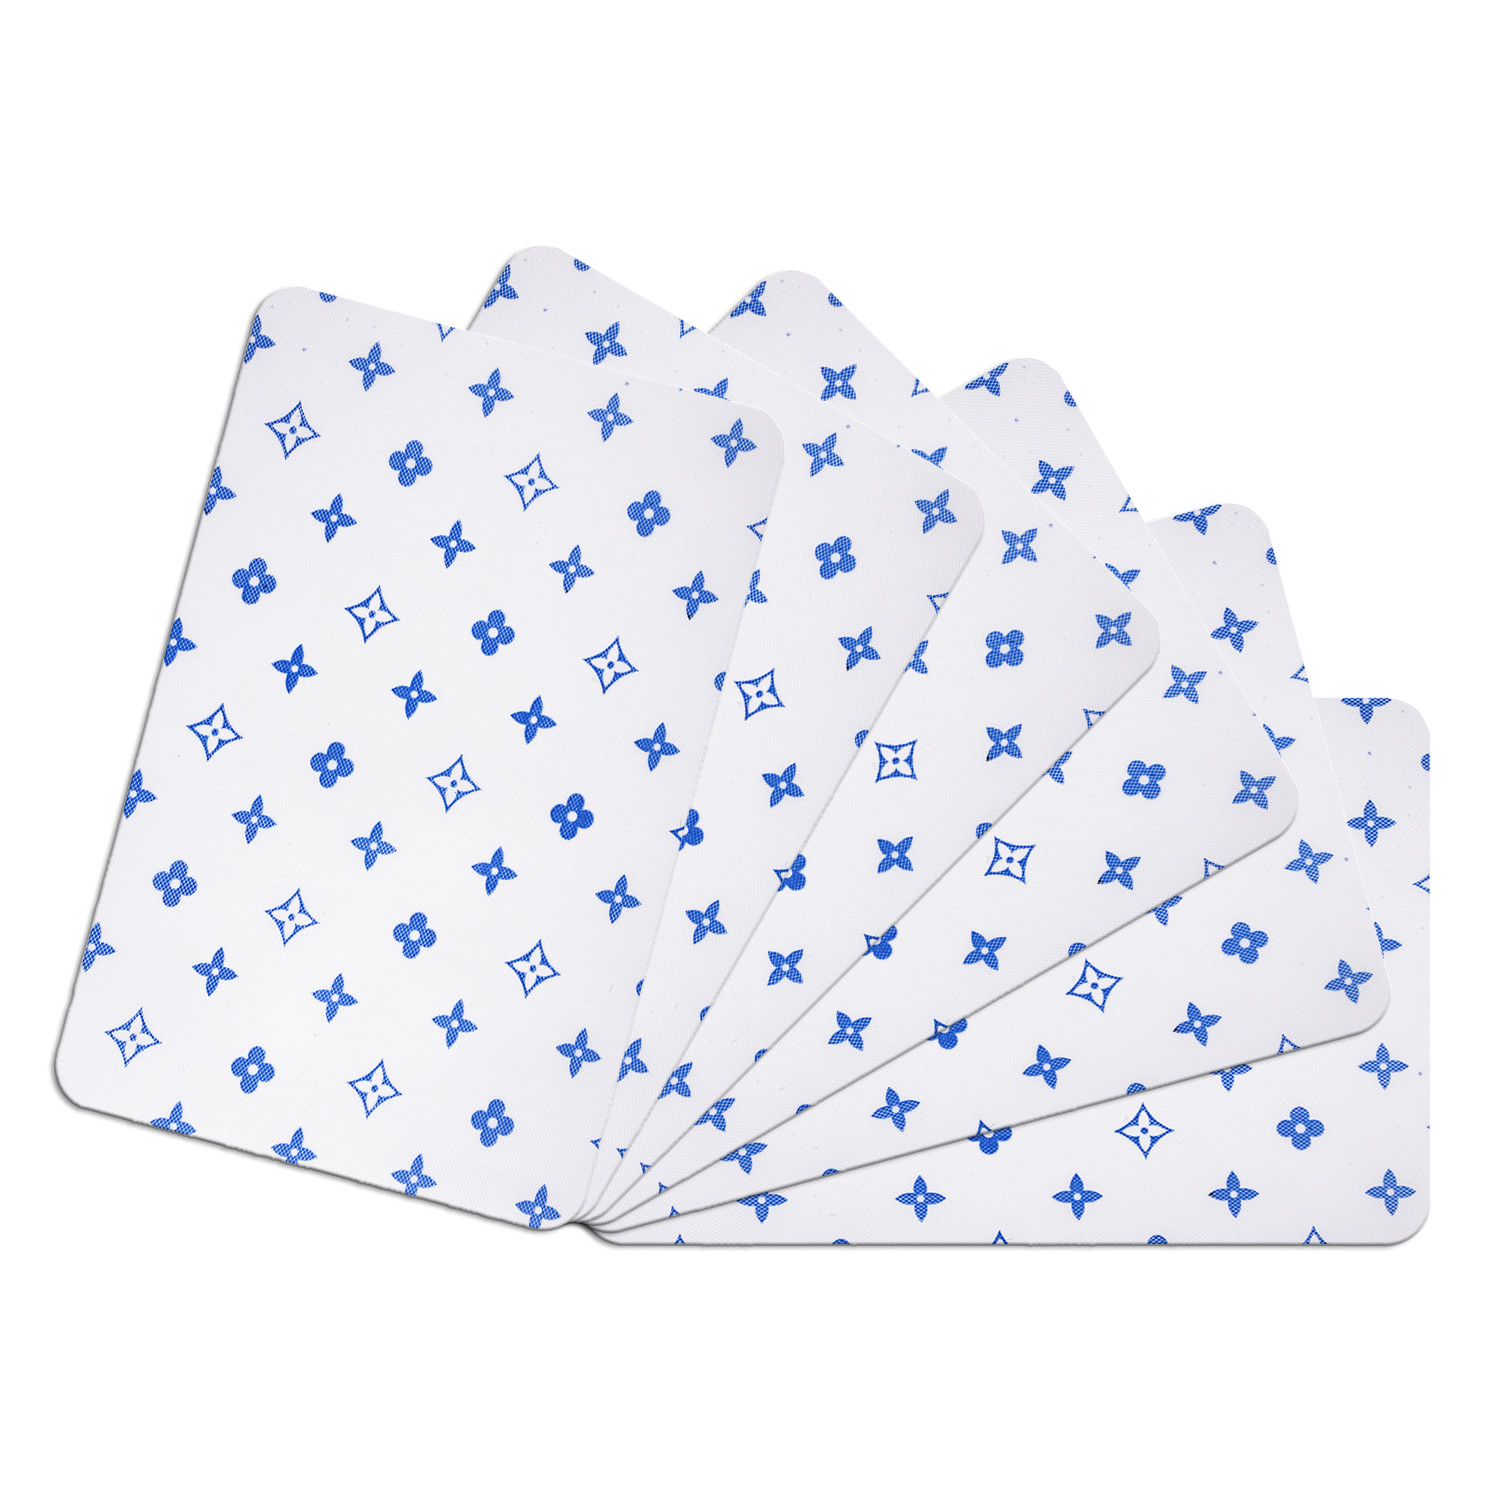 Kuber Industries Placemat | Placemats for Dining Room | Anti-Slip Table Mat Set | Placemats for Kitchen Table | Dining Table Placemats | Blue Star-Design Placemat | 6 Piece Set | White